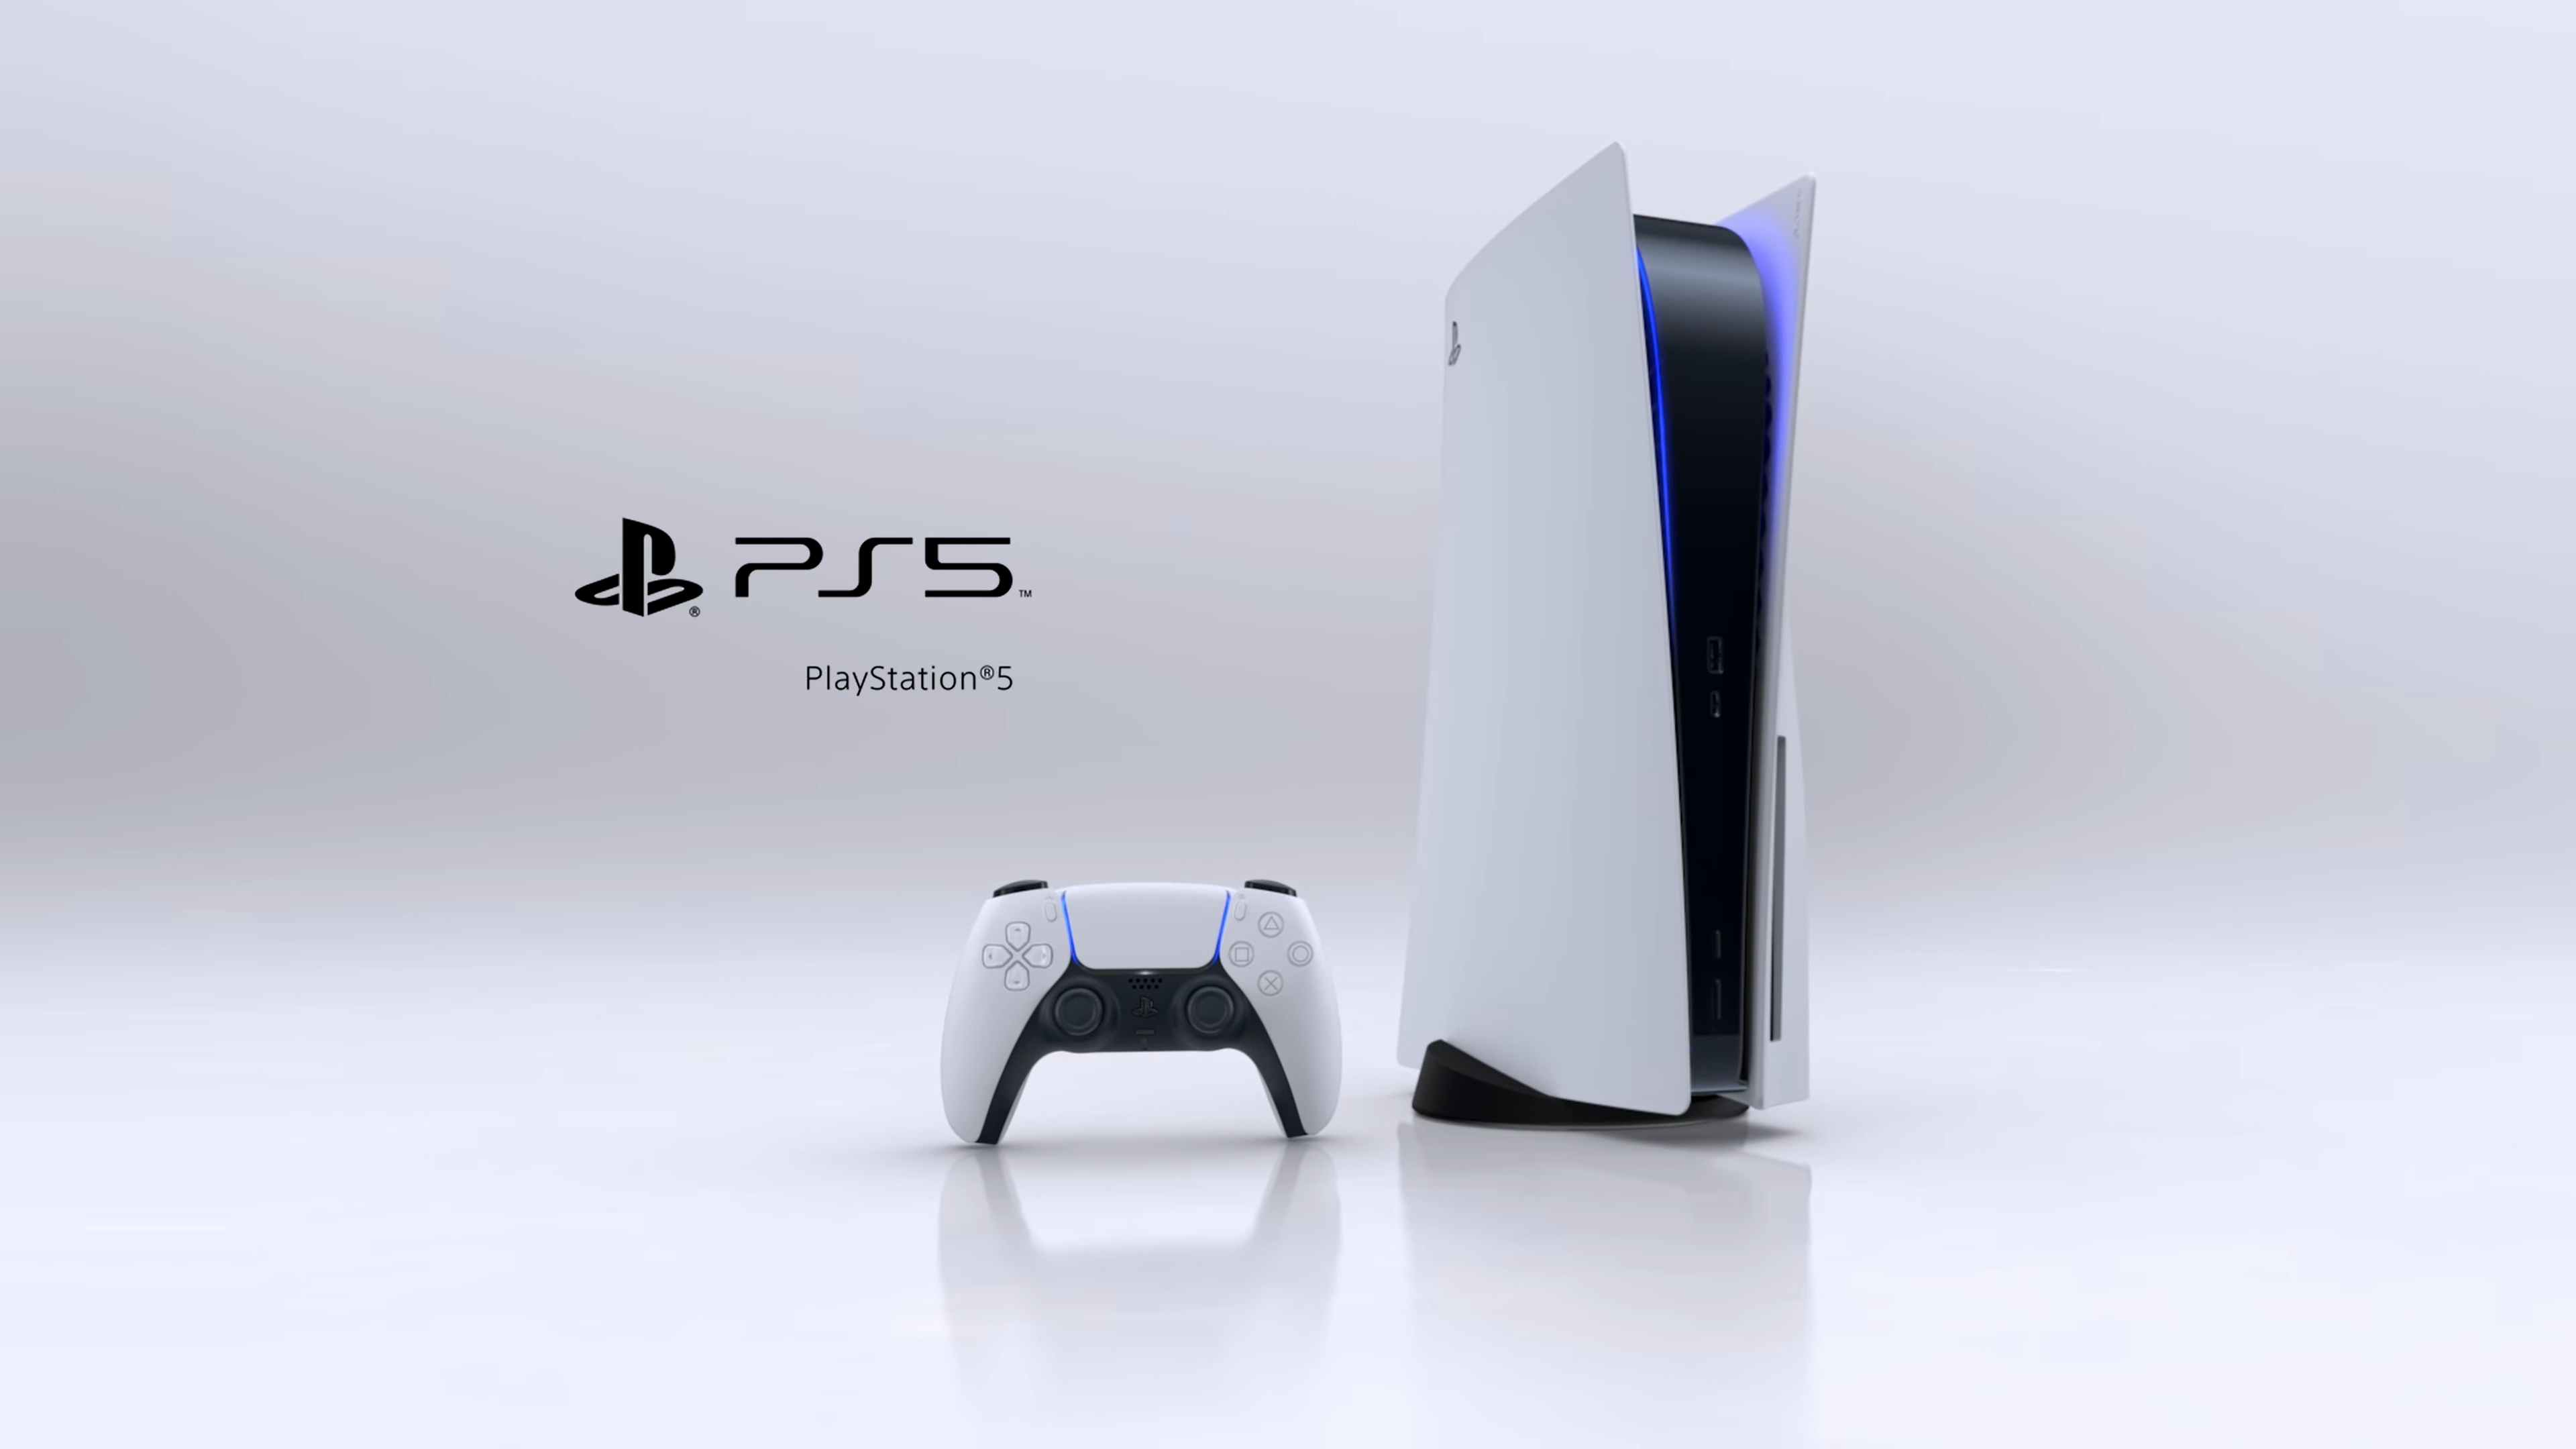 PS5 Wallpaper Free PS5 Background